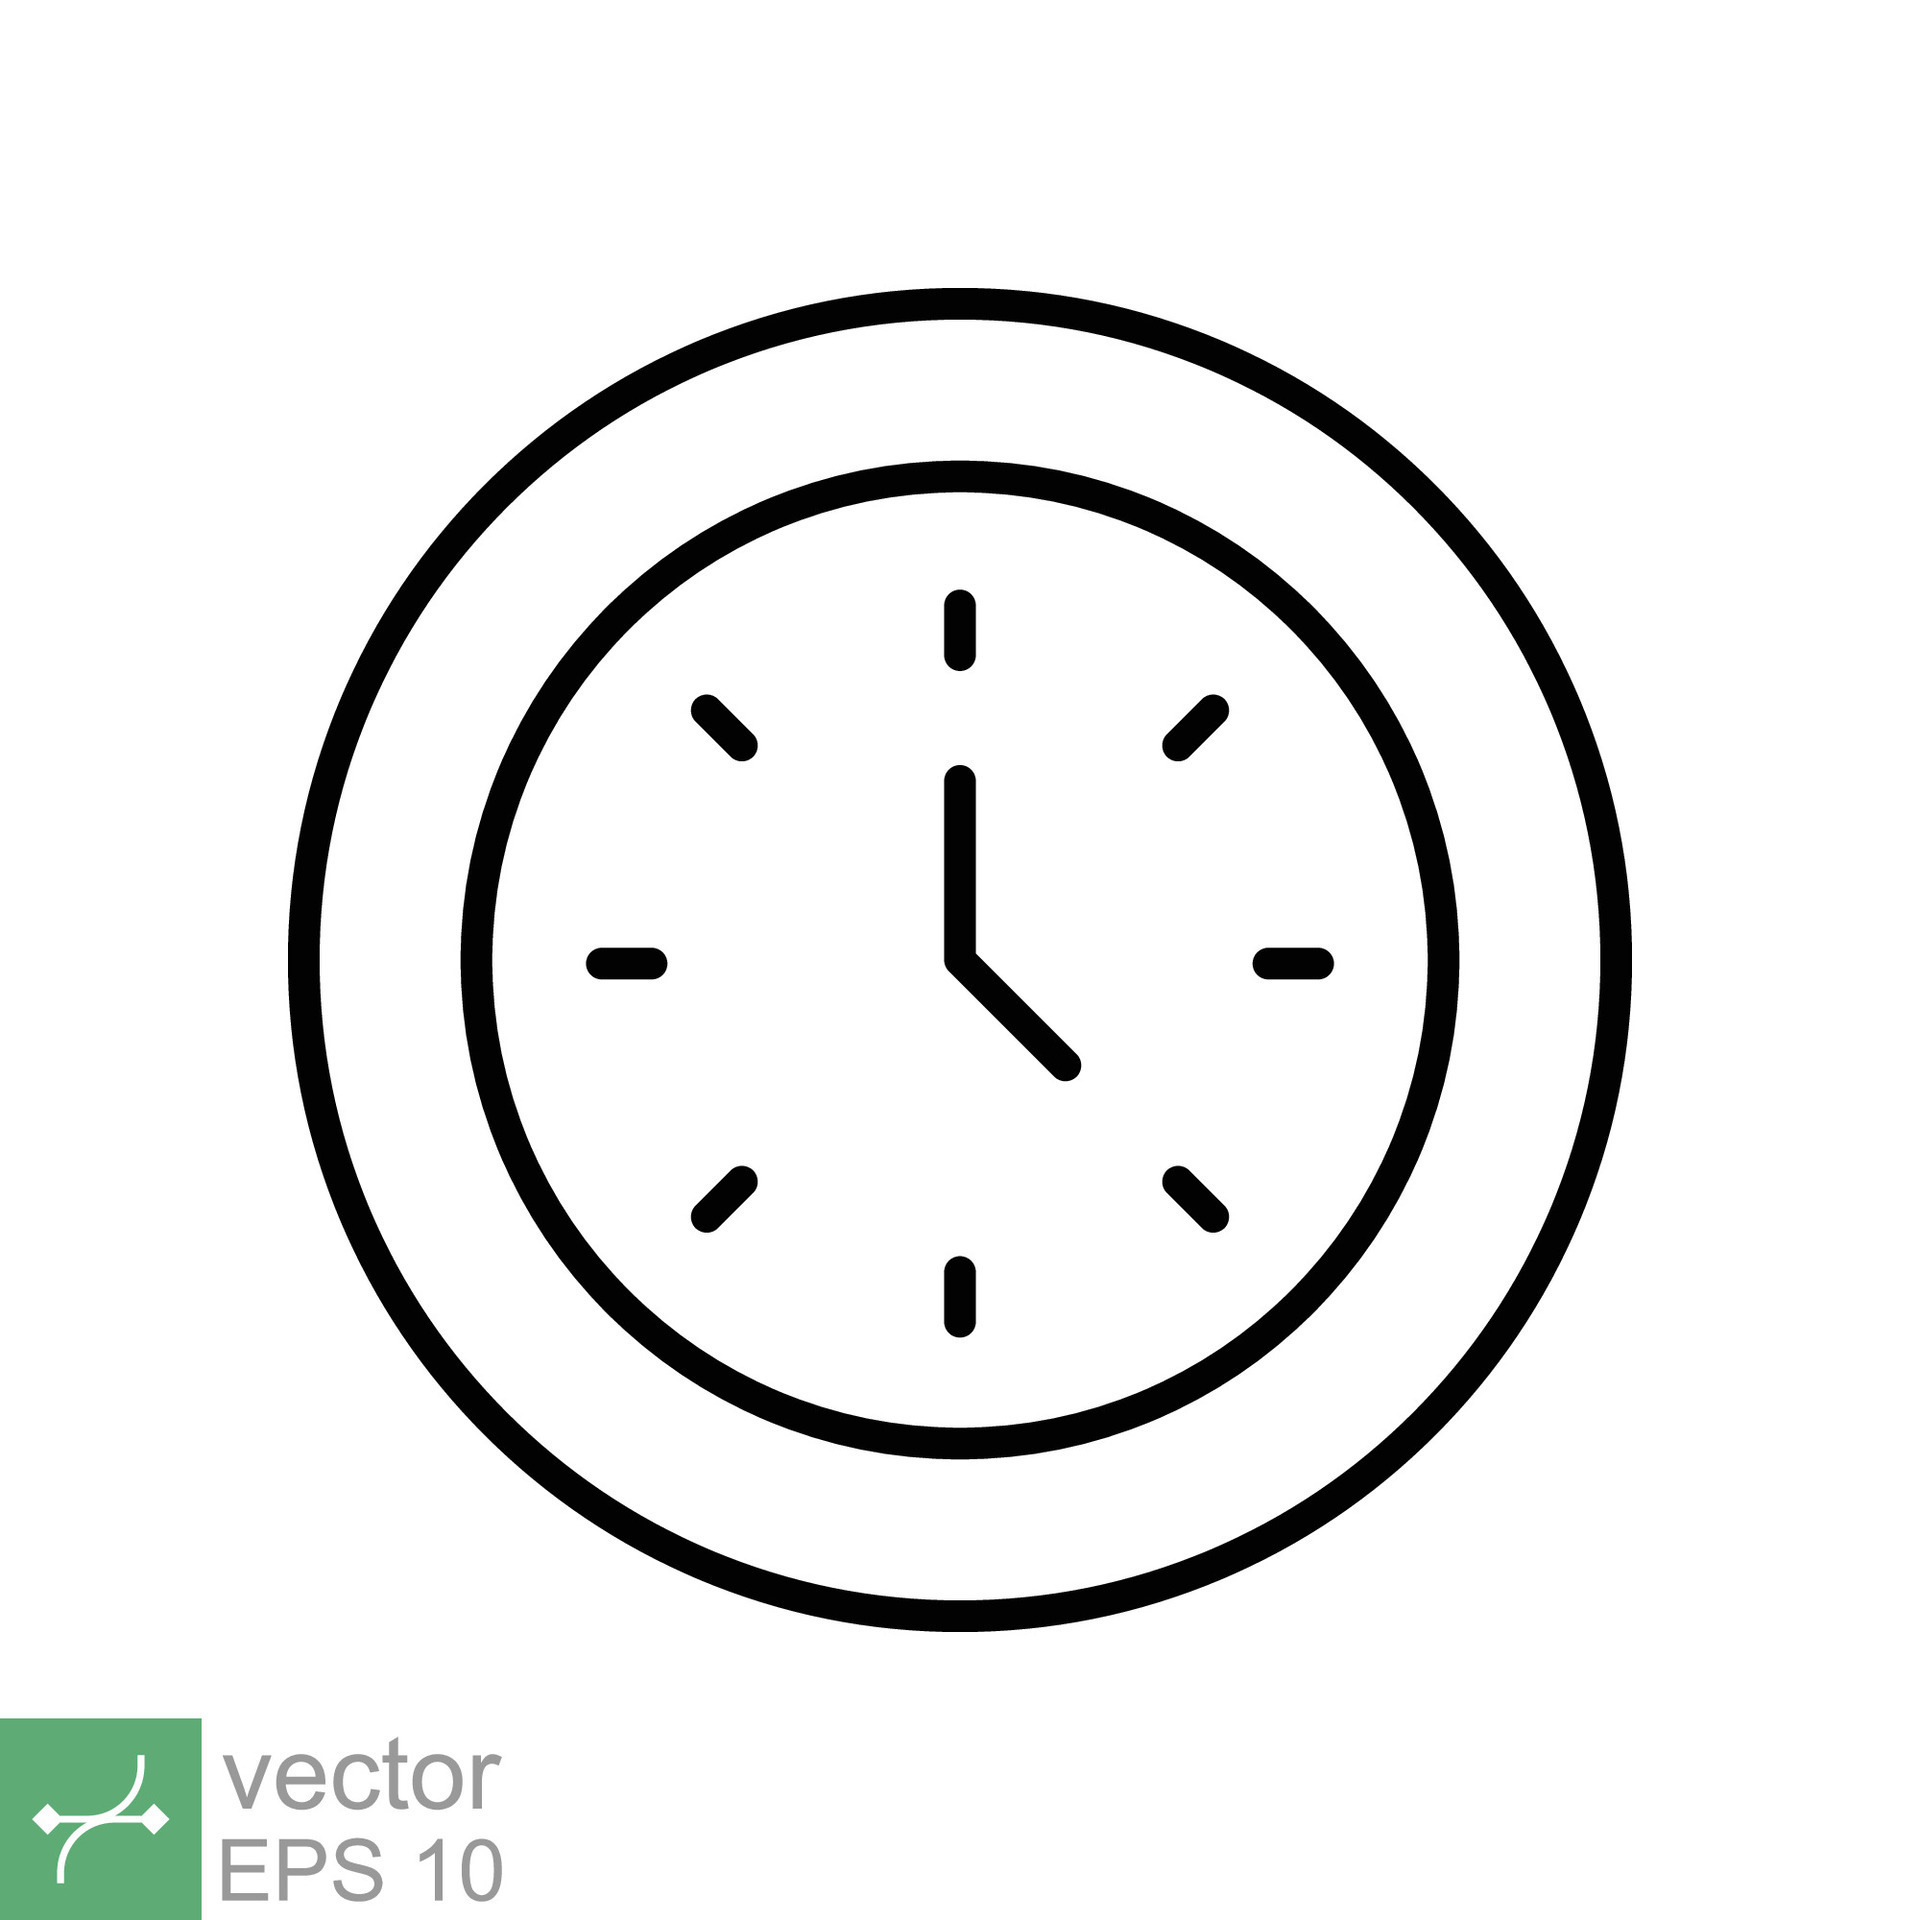 Clock Vector Icon Isolated On White Background Outline Thin Line Clock Icon  For Website Design And Mobile App Development Thin Line Clock Outline Icon  Vector Illustration Stock Illustration - Download Image Now 